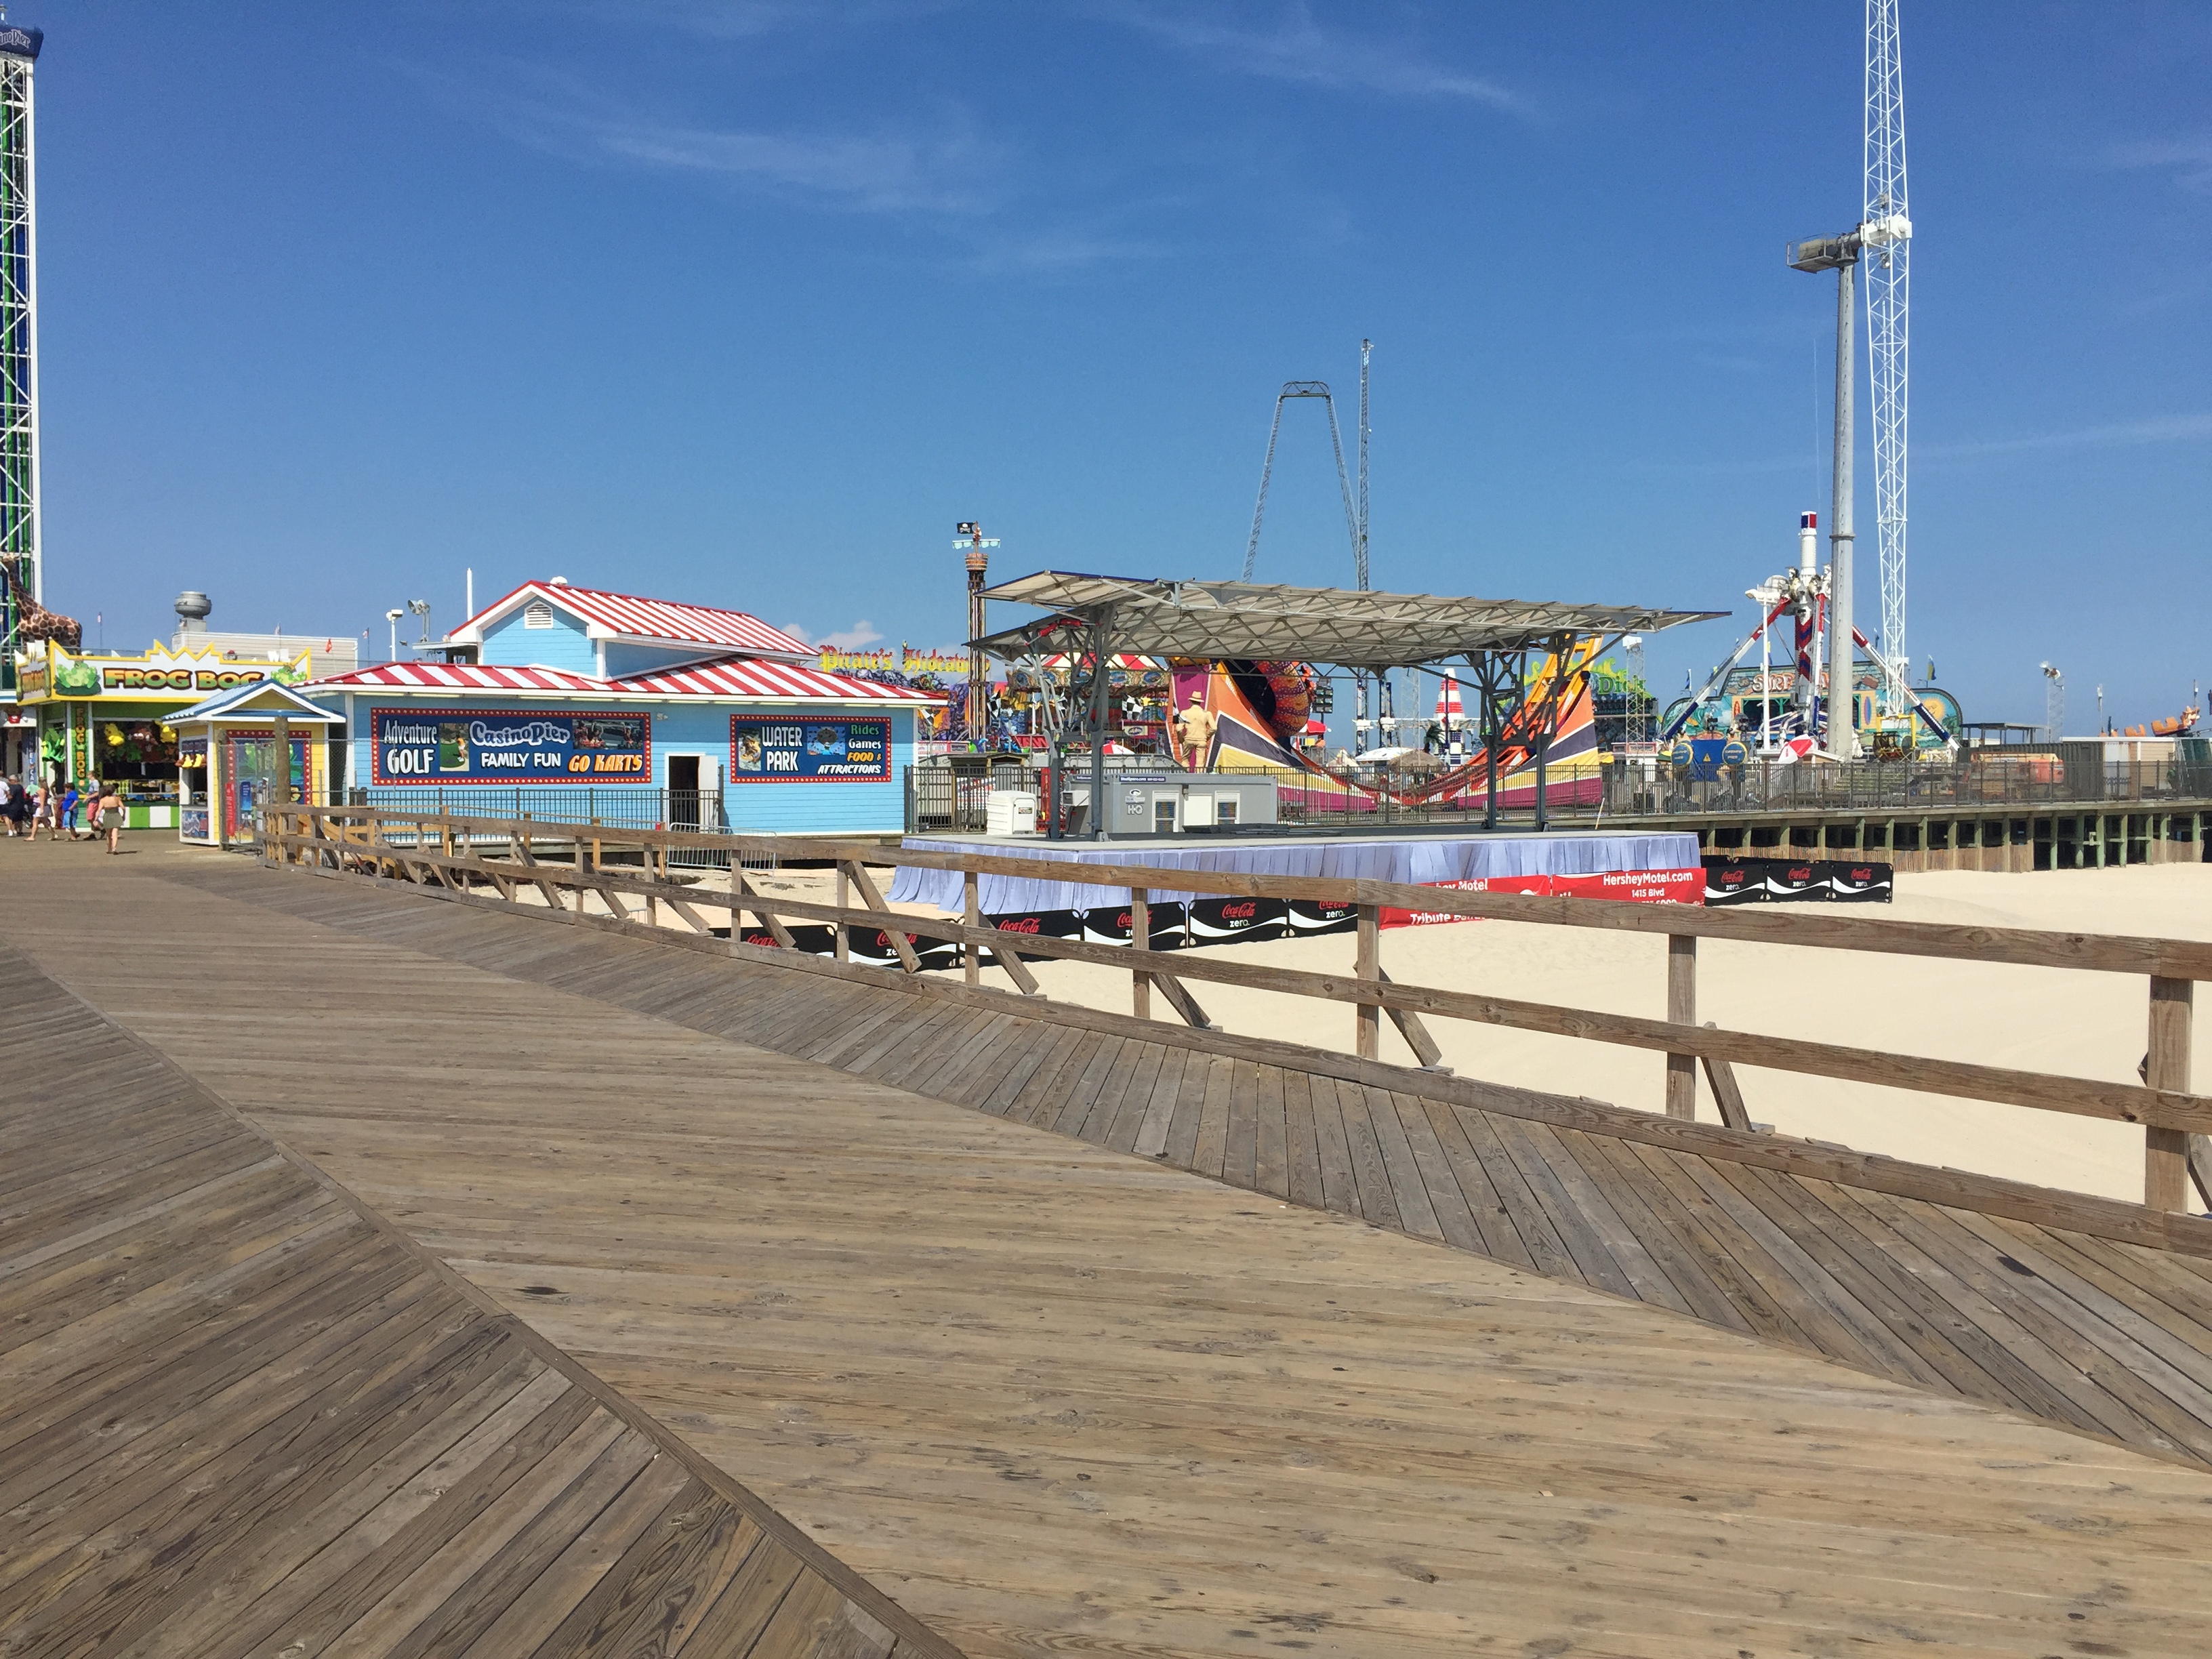 Land Title From 1911 Could Affect Rebuilding of Boardwalk Site ...